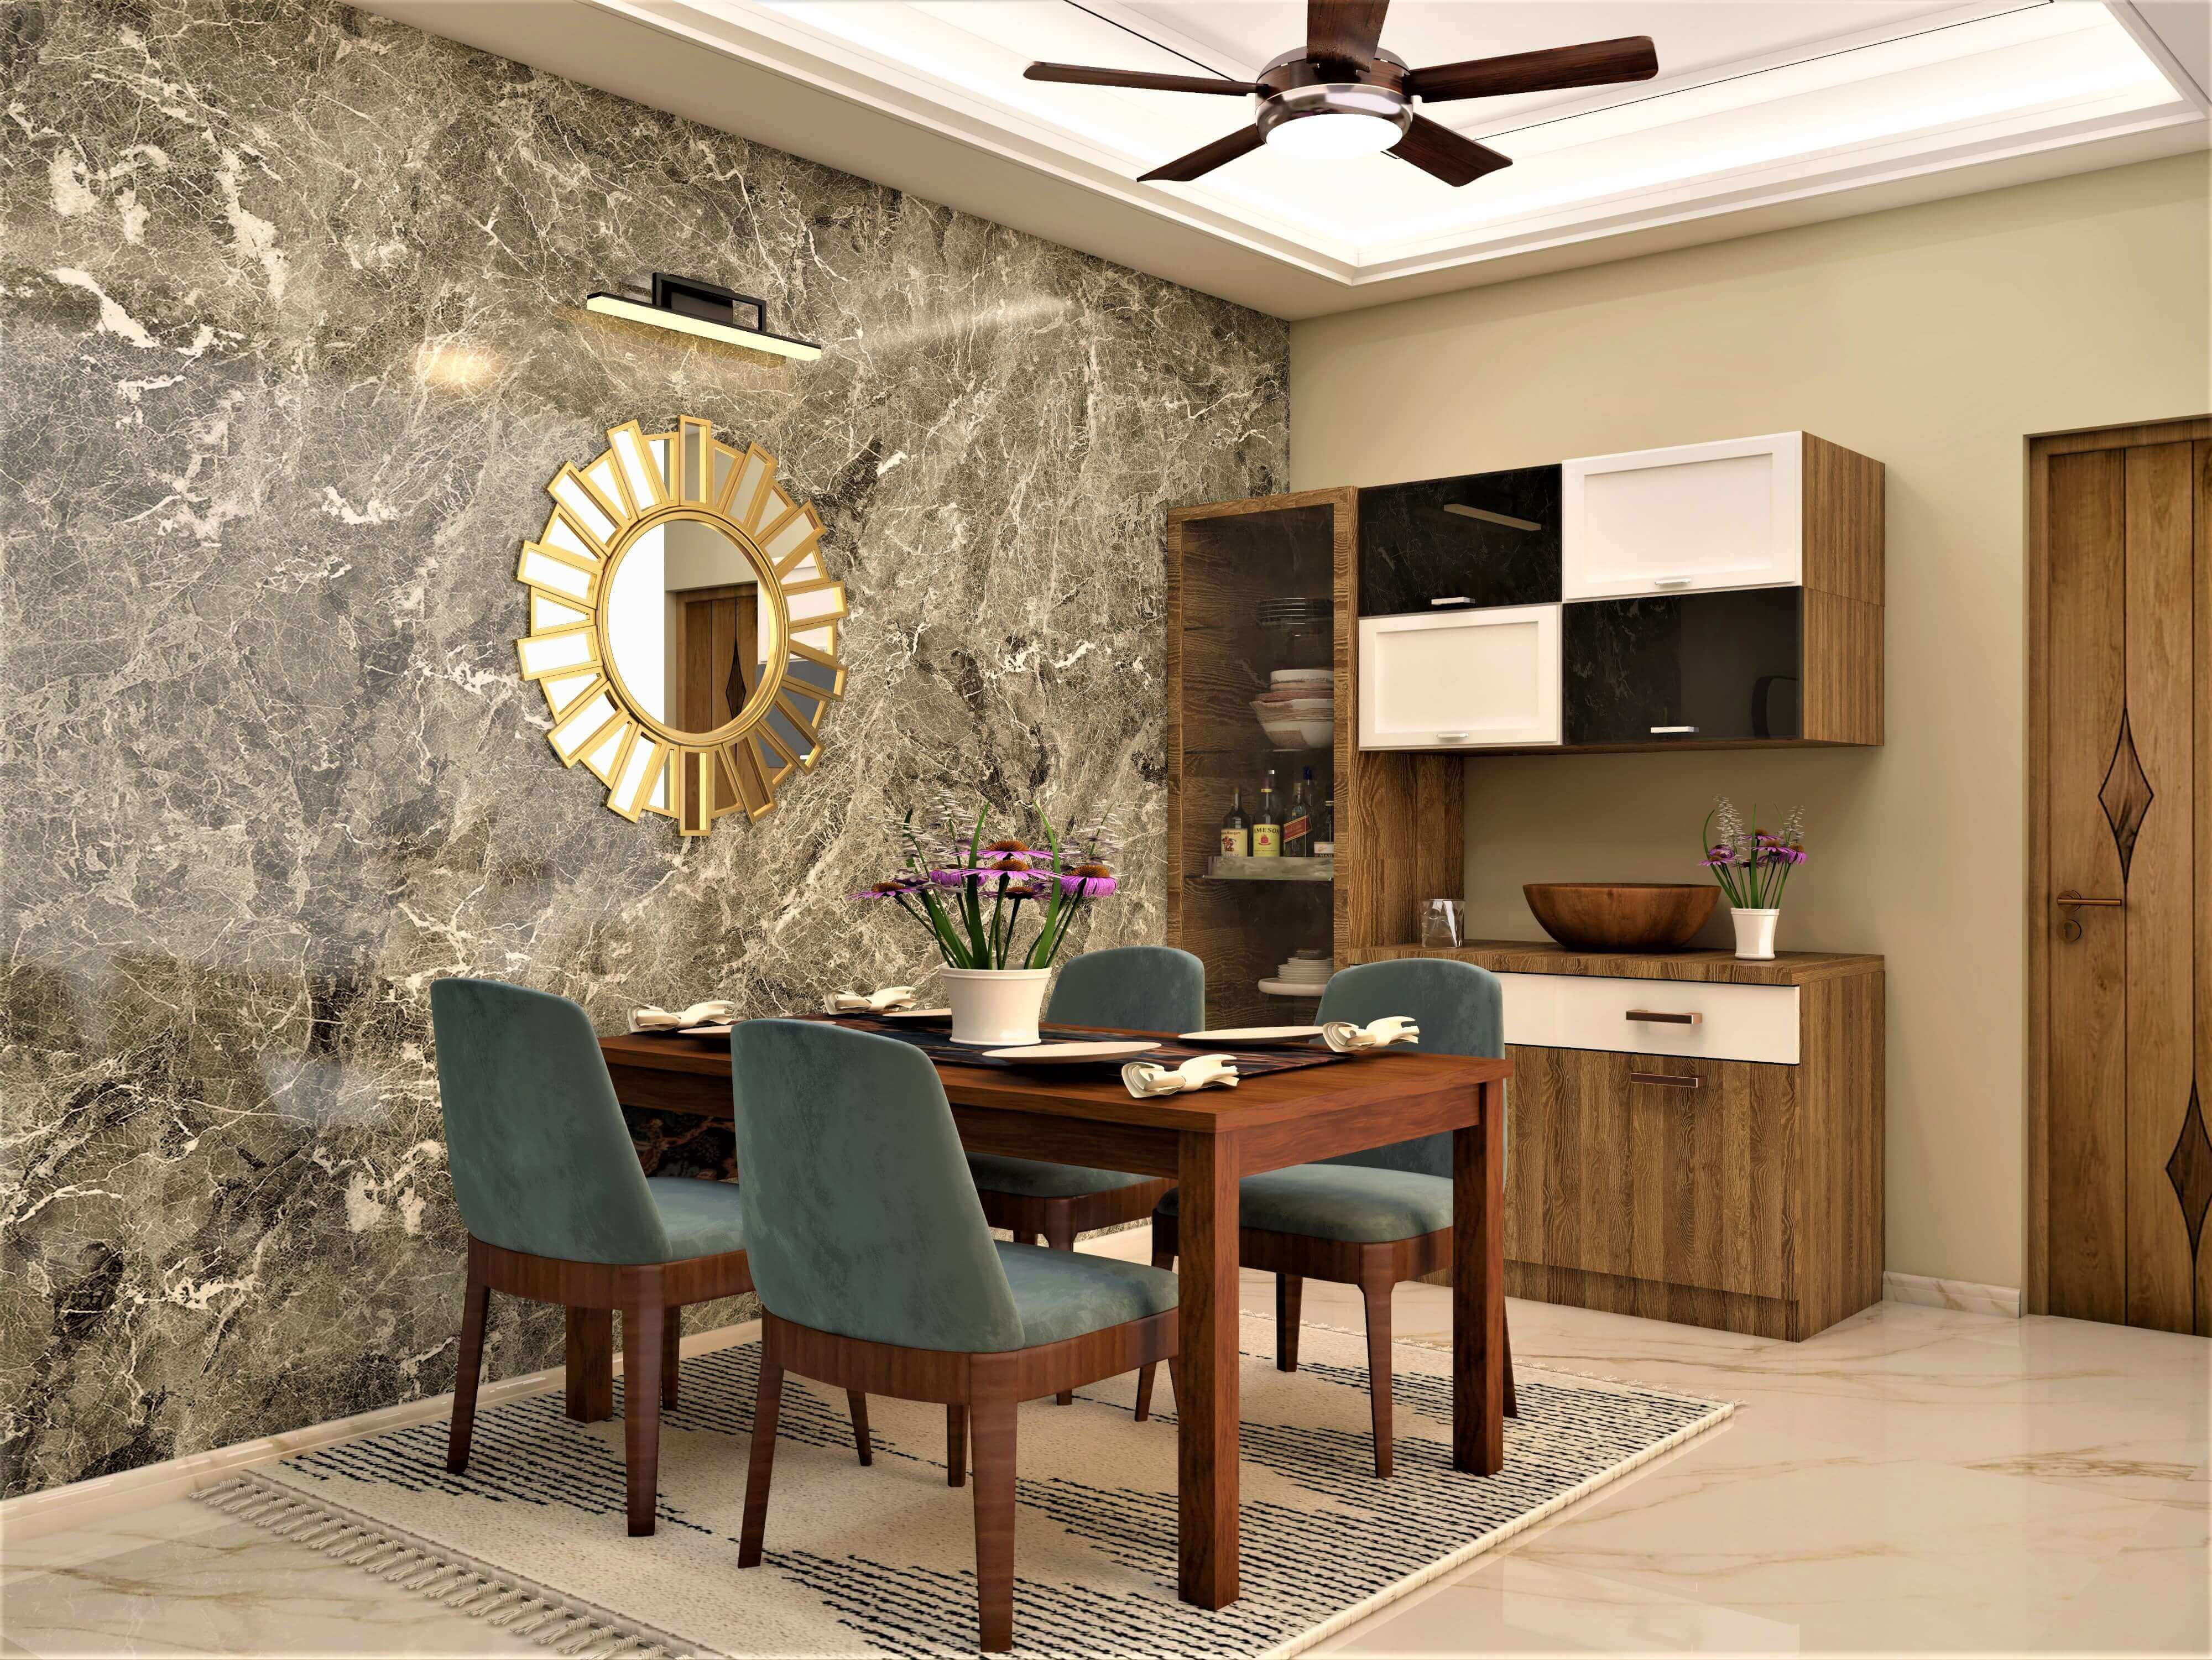 An apartment dining room design with tiled walls & a crockery unit - Beautiful Homes